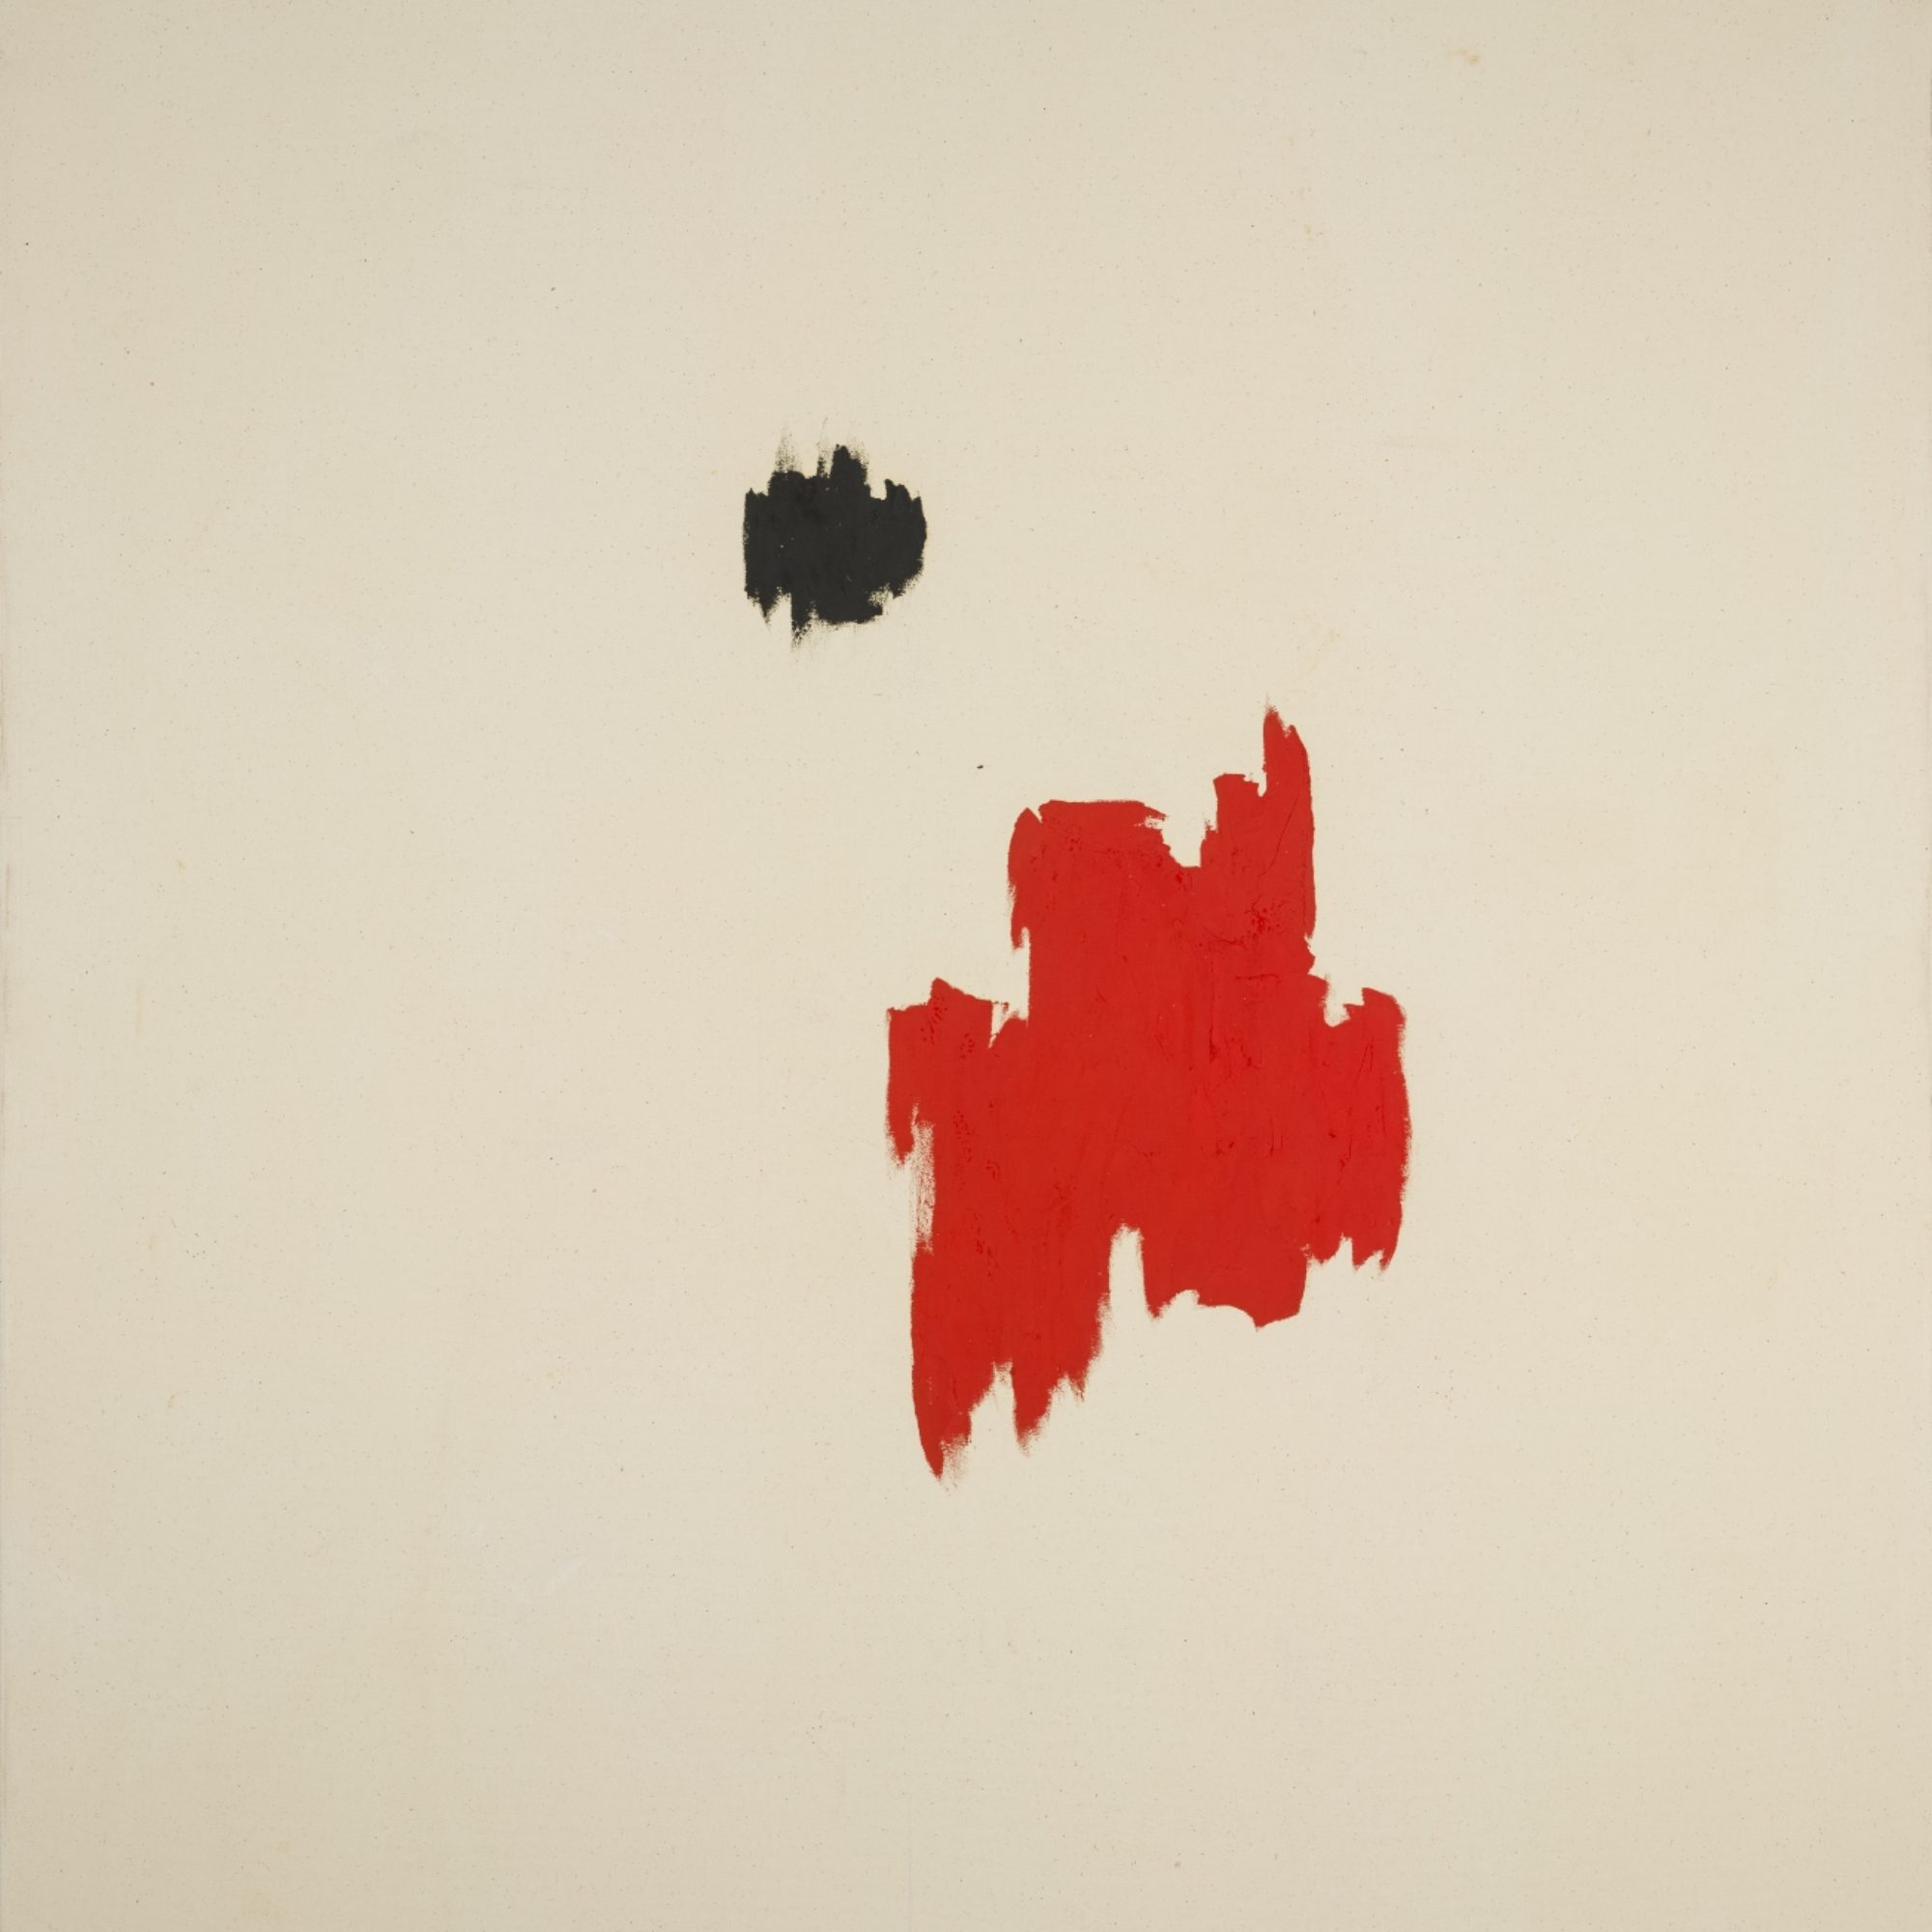 Abstract painting by Clyfford Still with a small black paint spot and larger reddish orange spot